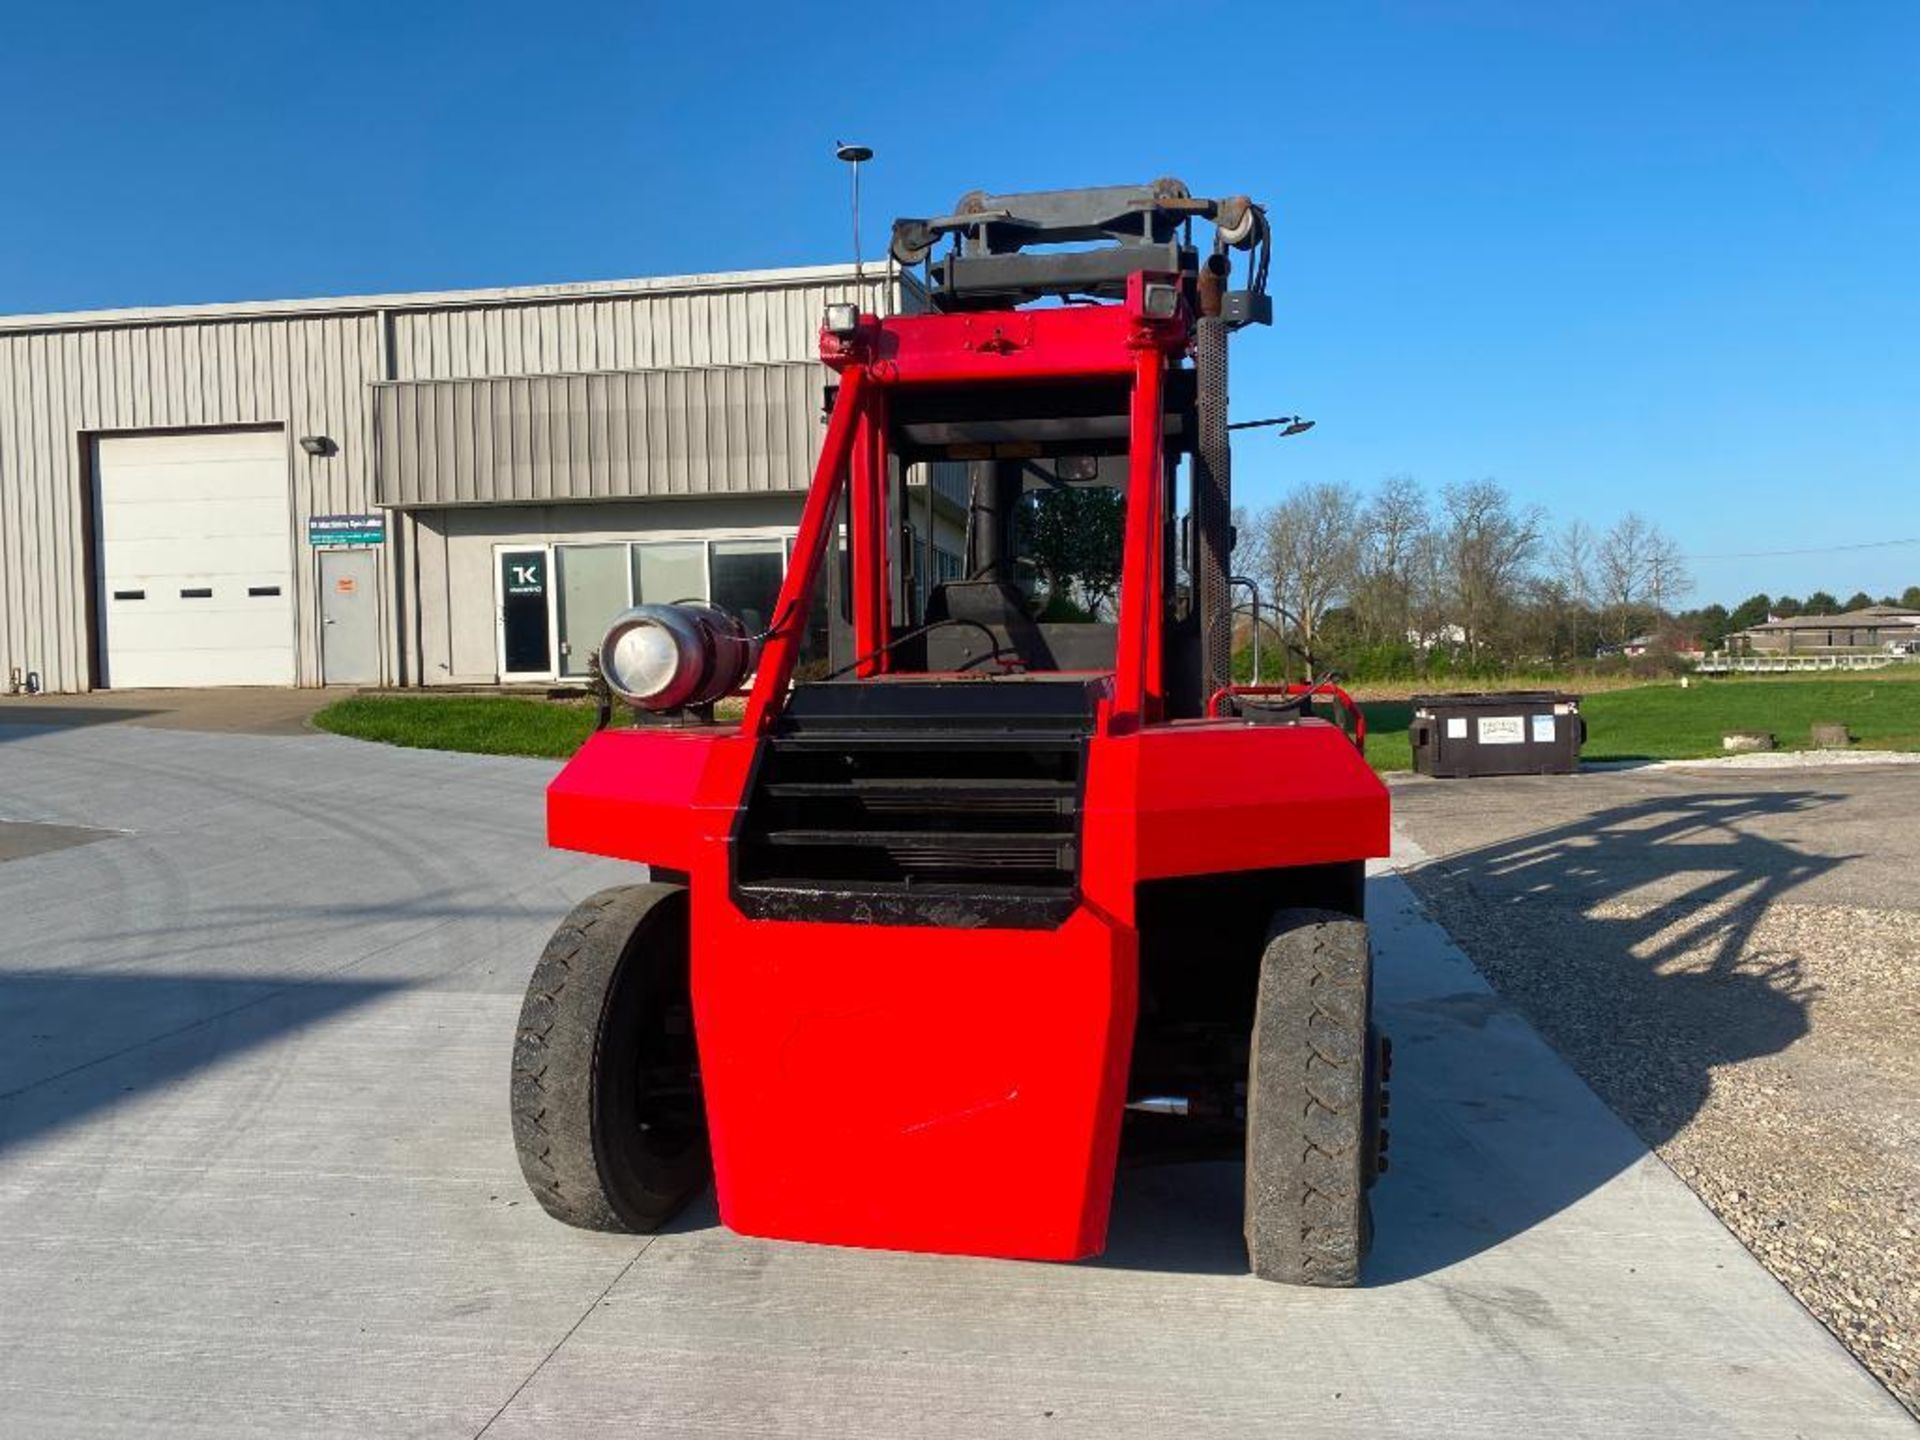 Taylor 25,000-LB. Capacity Forklift, Model THD-250S, S/N S-T1-29286, LPG, Dual Drive Pneumatic Tires - Image 4 of 5